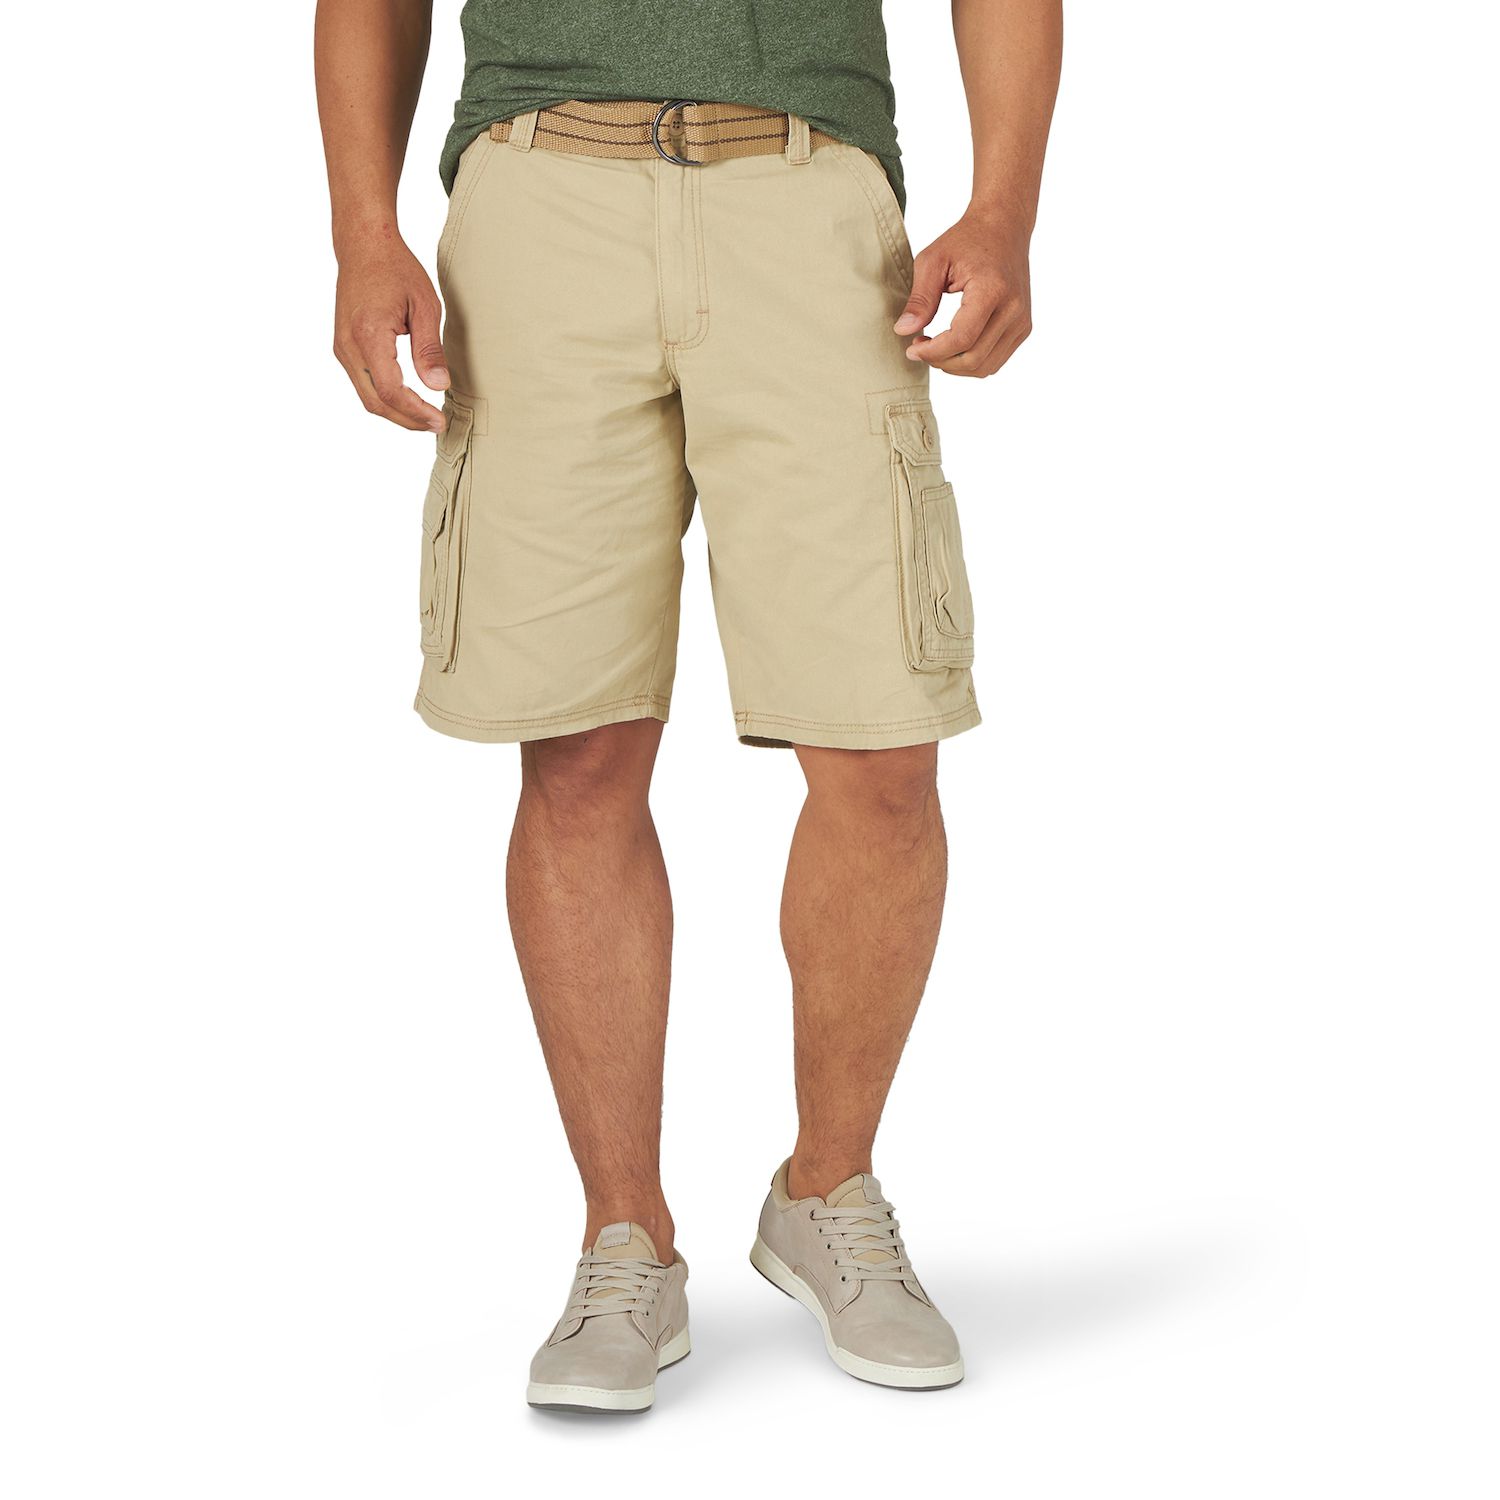 Image for Lee Men's Wyoming Belted Cargo Shorts at Kohl's.